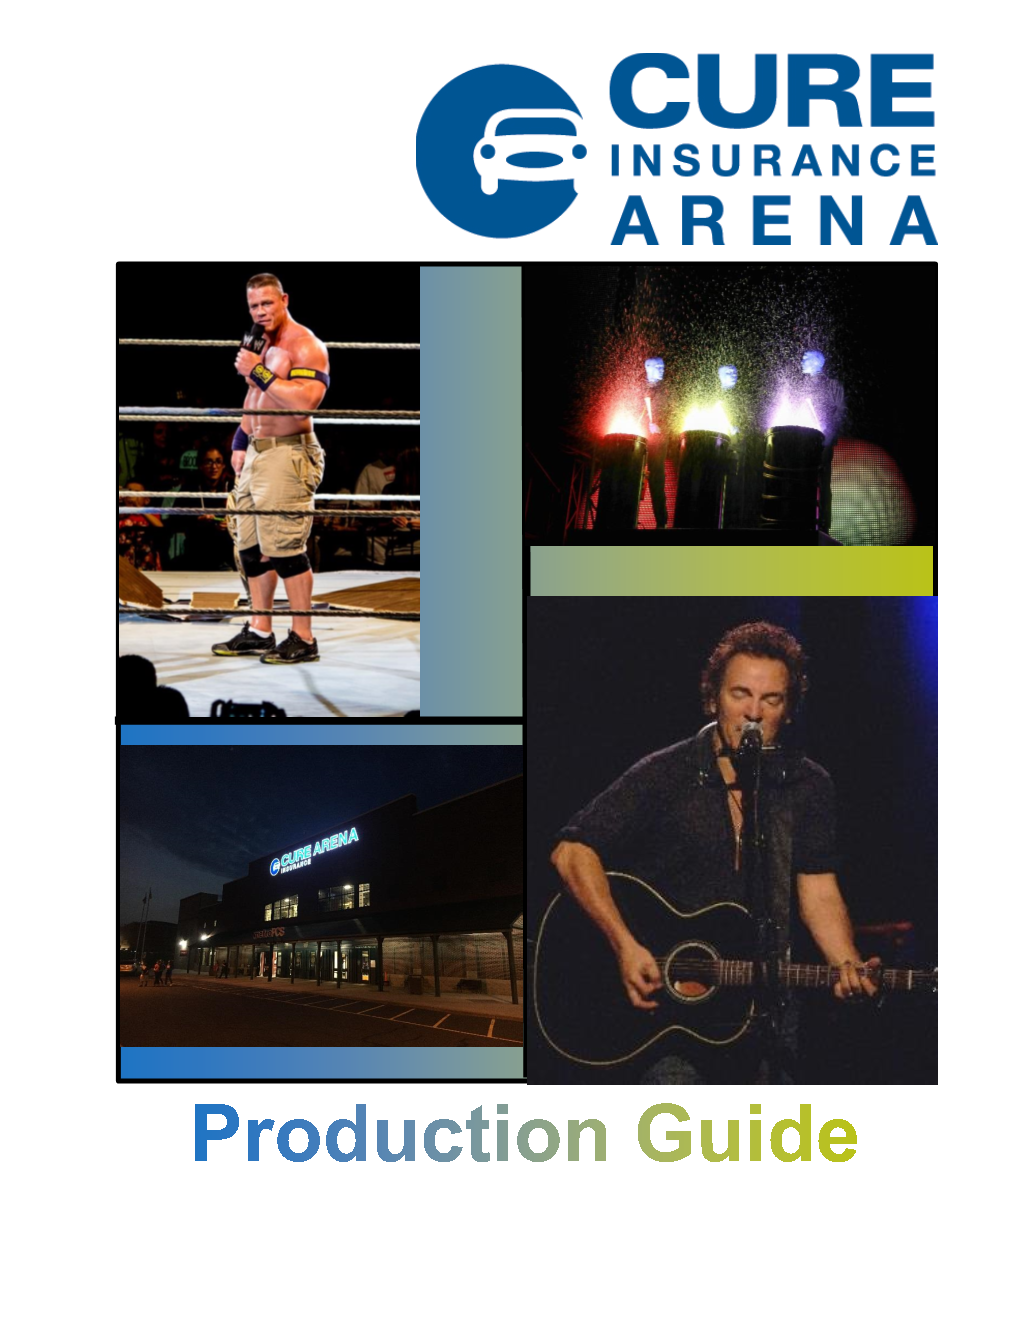 Promoter's Guide